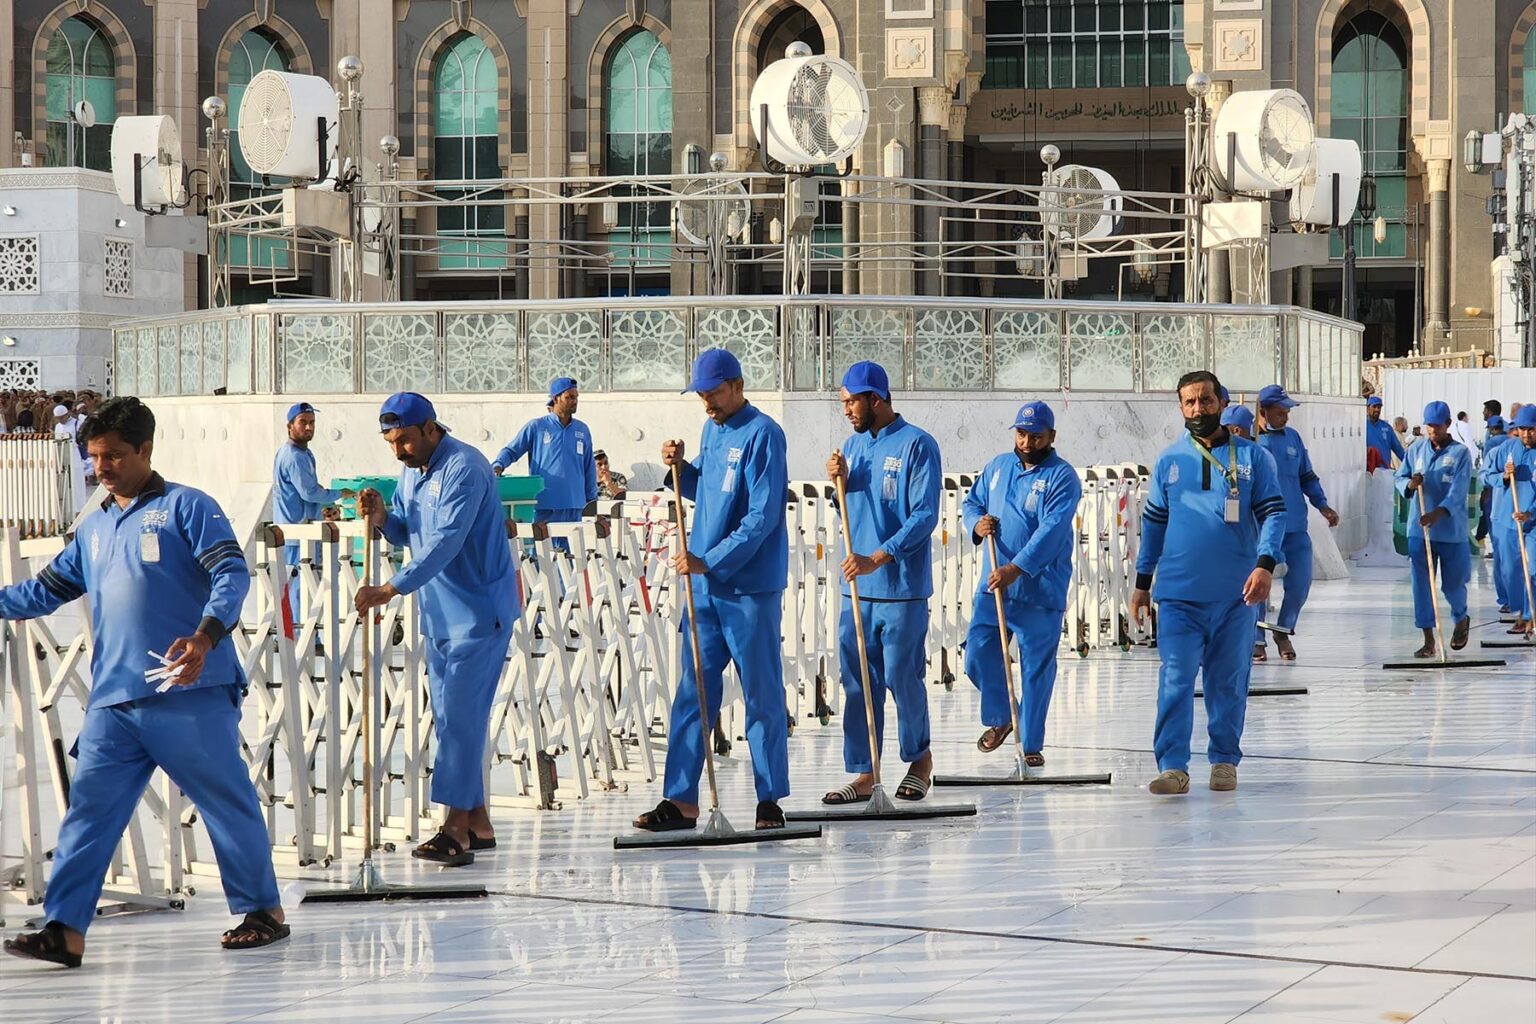 Cleaners working at the Masjid al-Haram (Grand Mosque), where the Islam's holiest site the Kaaba is located, ahead of the beginning of Hajj pilgrimage in Mecca, Saudi Arabia.